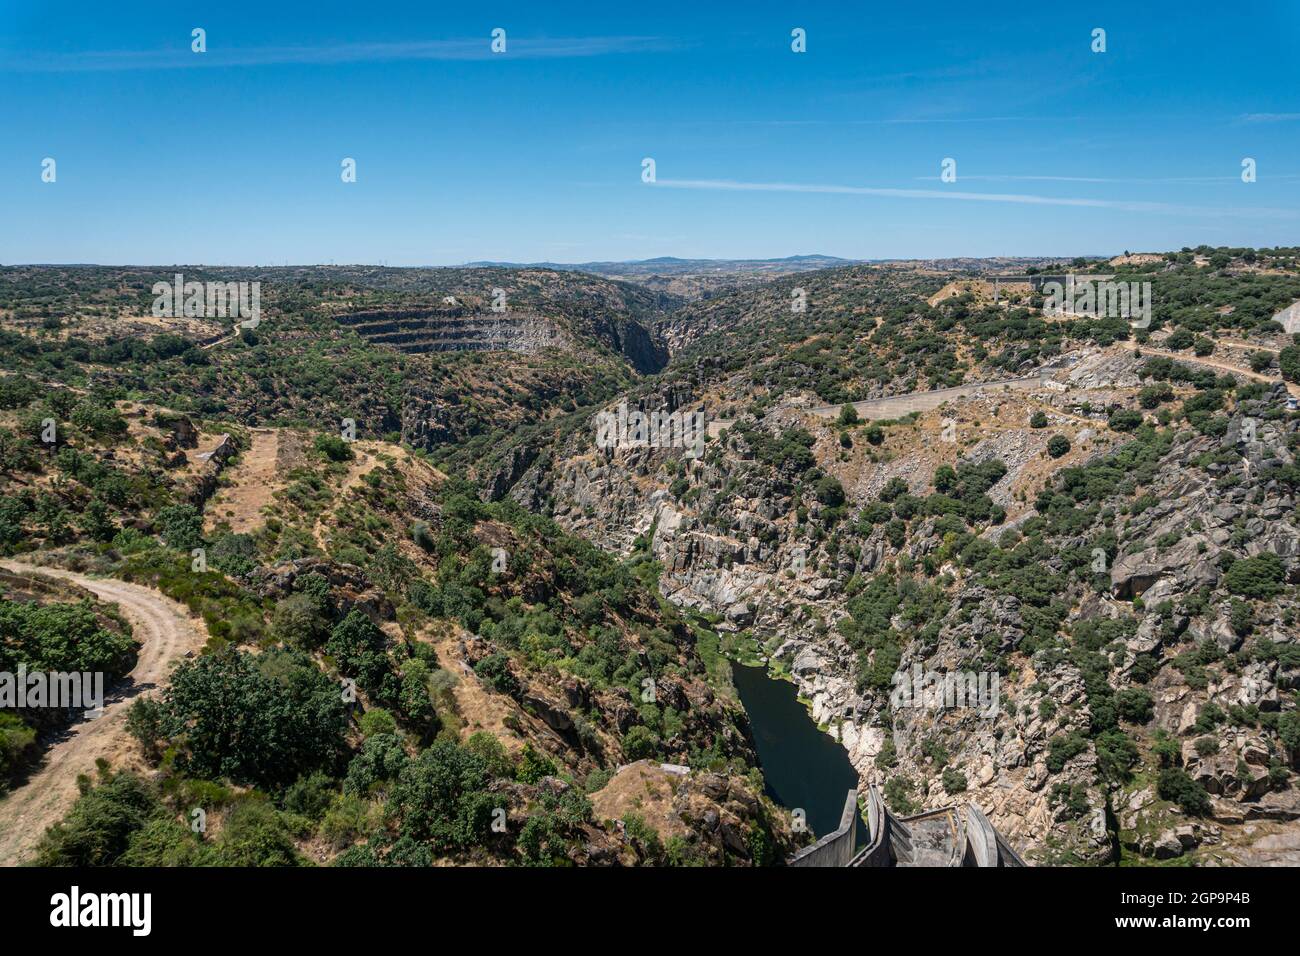 View across the valley from Almendra (Almond) Dam, also known as Villarino Dam, in Salamanca, Spain Stock Photo